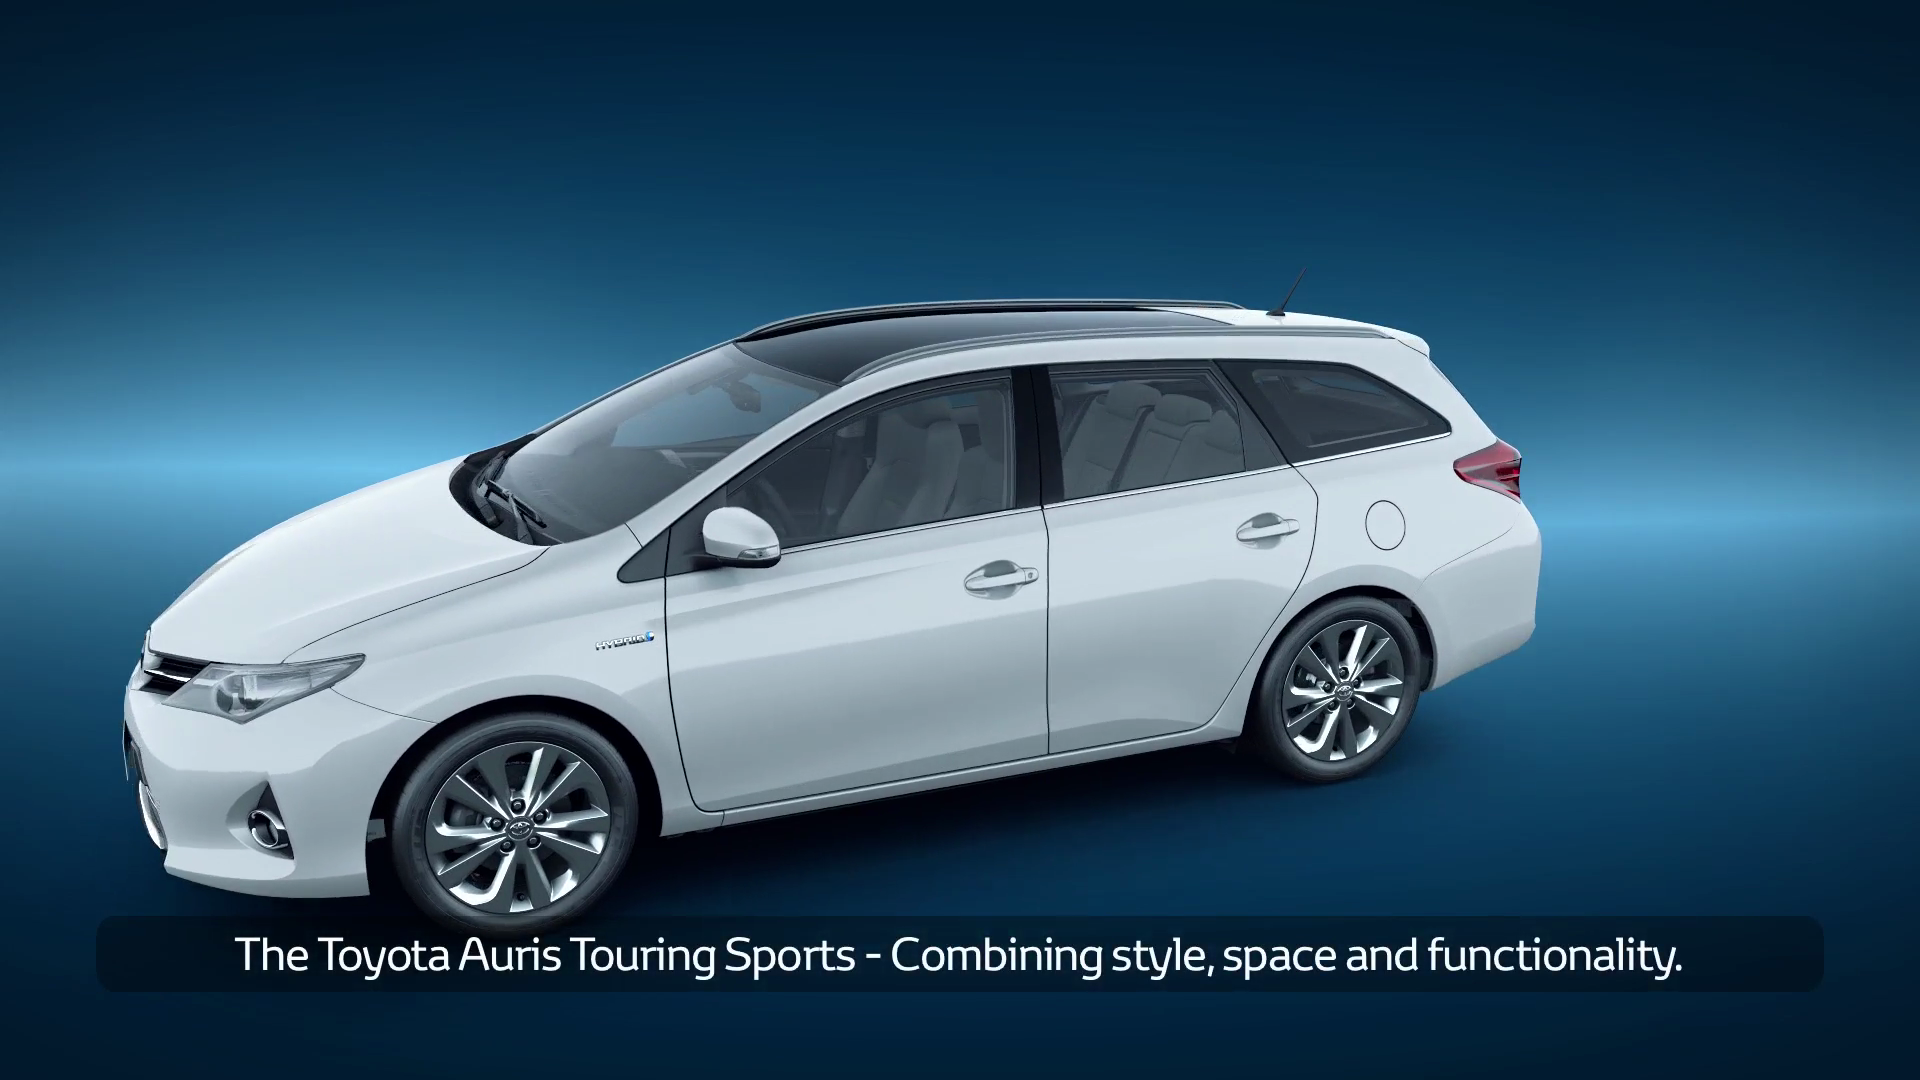 Auris Hybrid Touring Sports Functionality With Captions